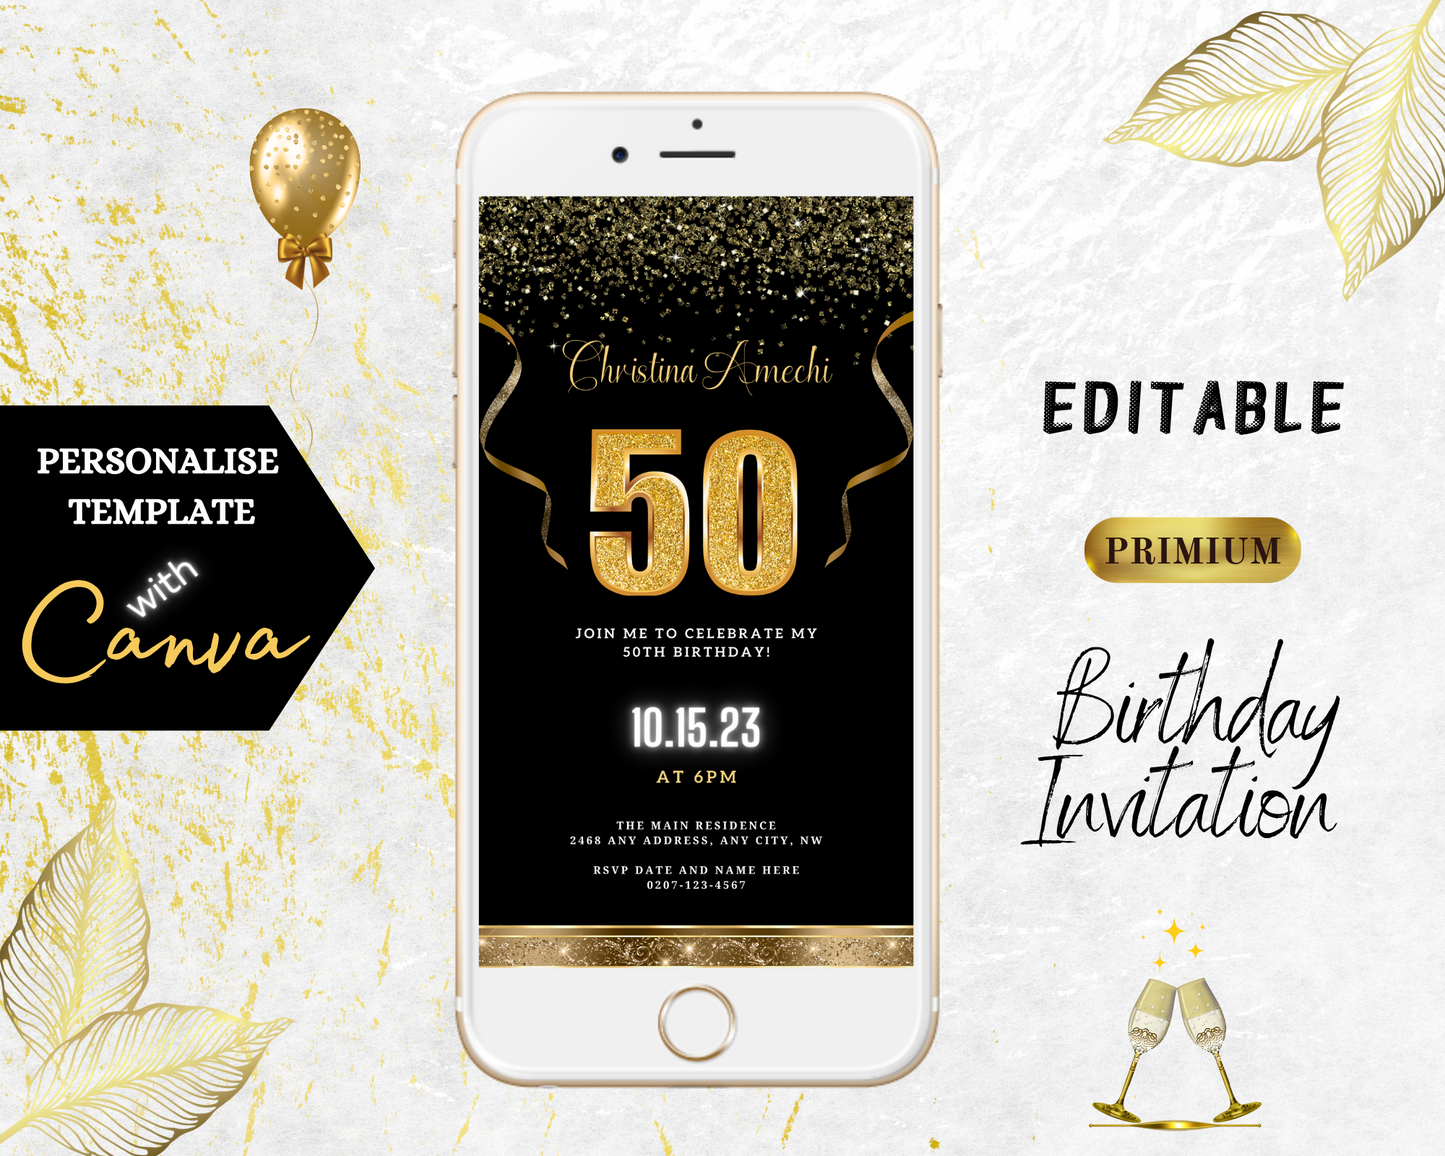 Black Gold Confetti 50th Birthday Evite displayed on a smartphone, featuring customizable text and design elements for a celebratory invitation.